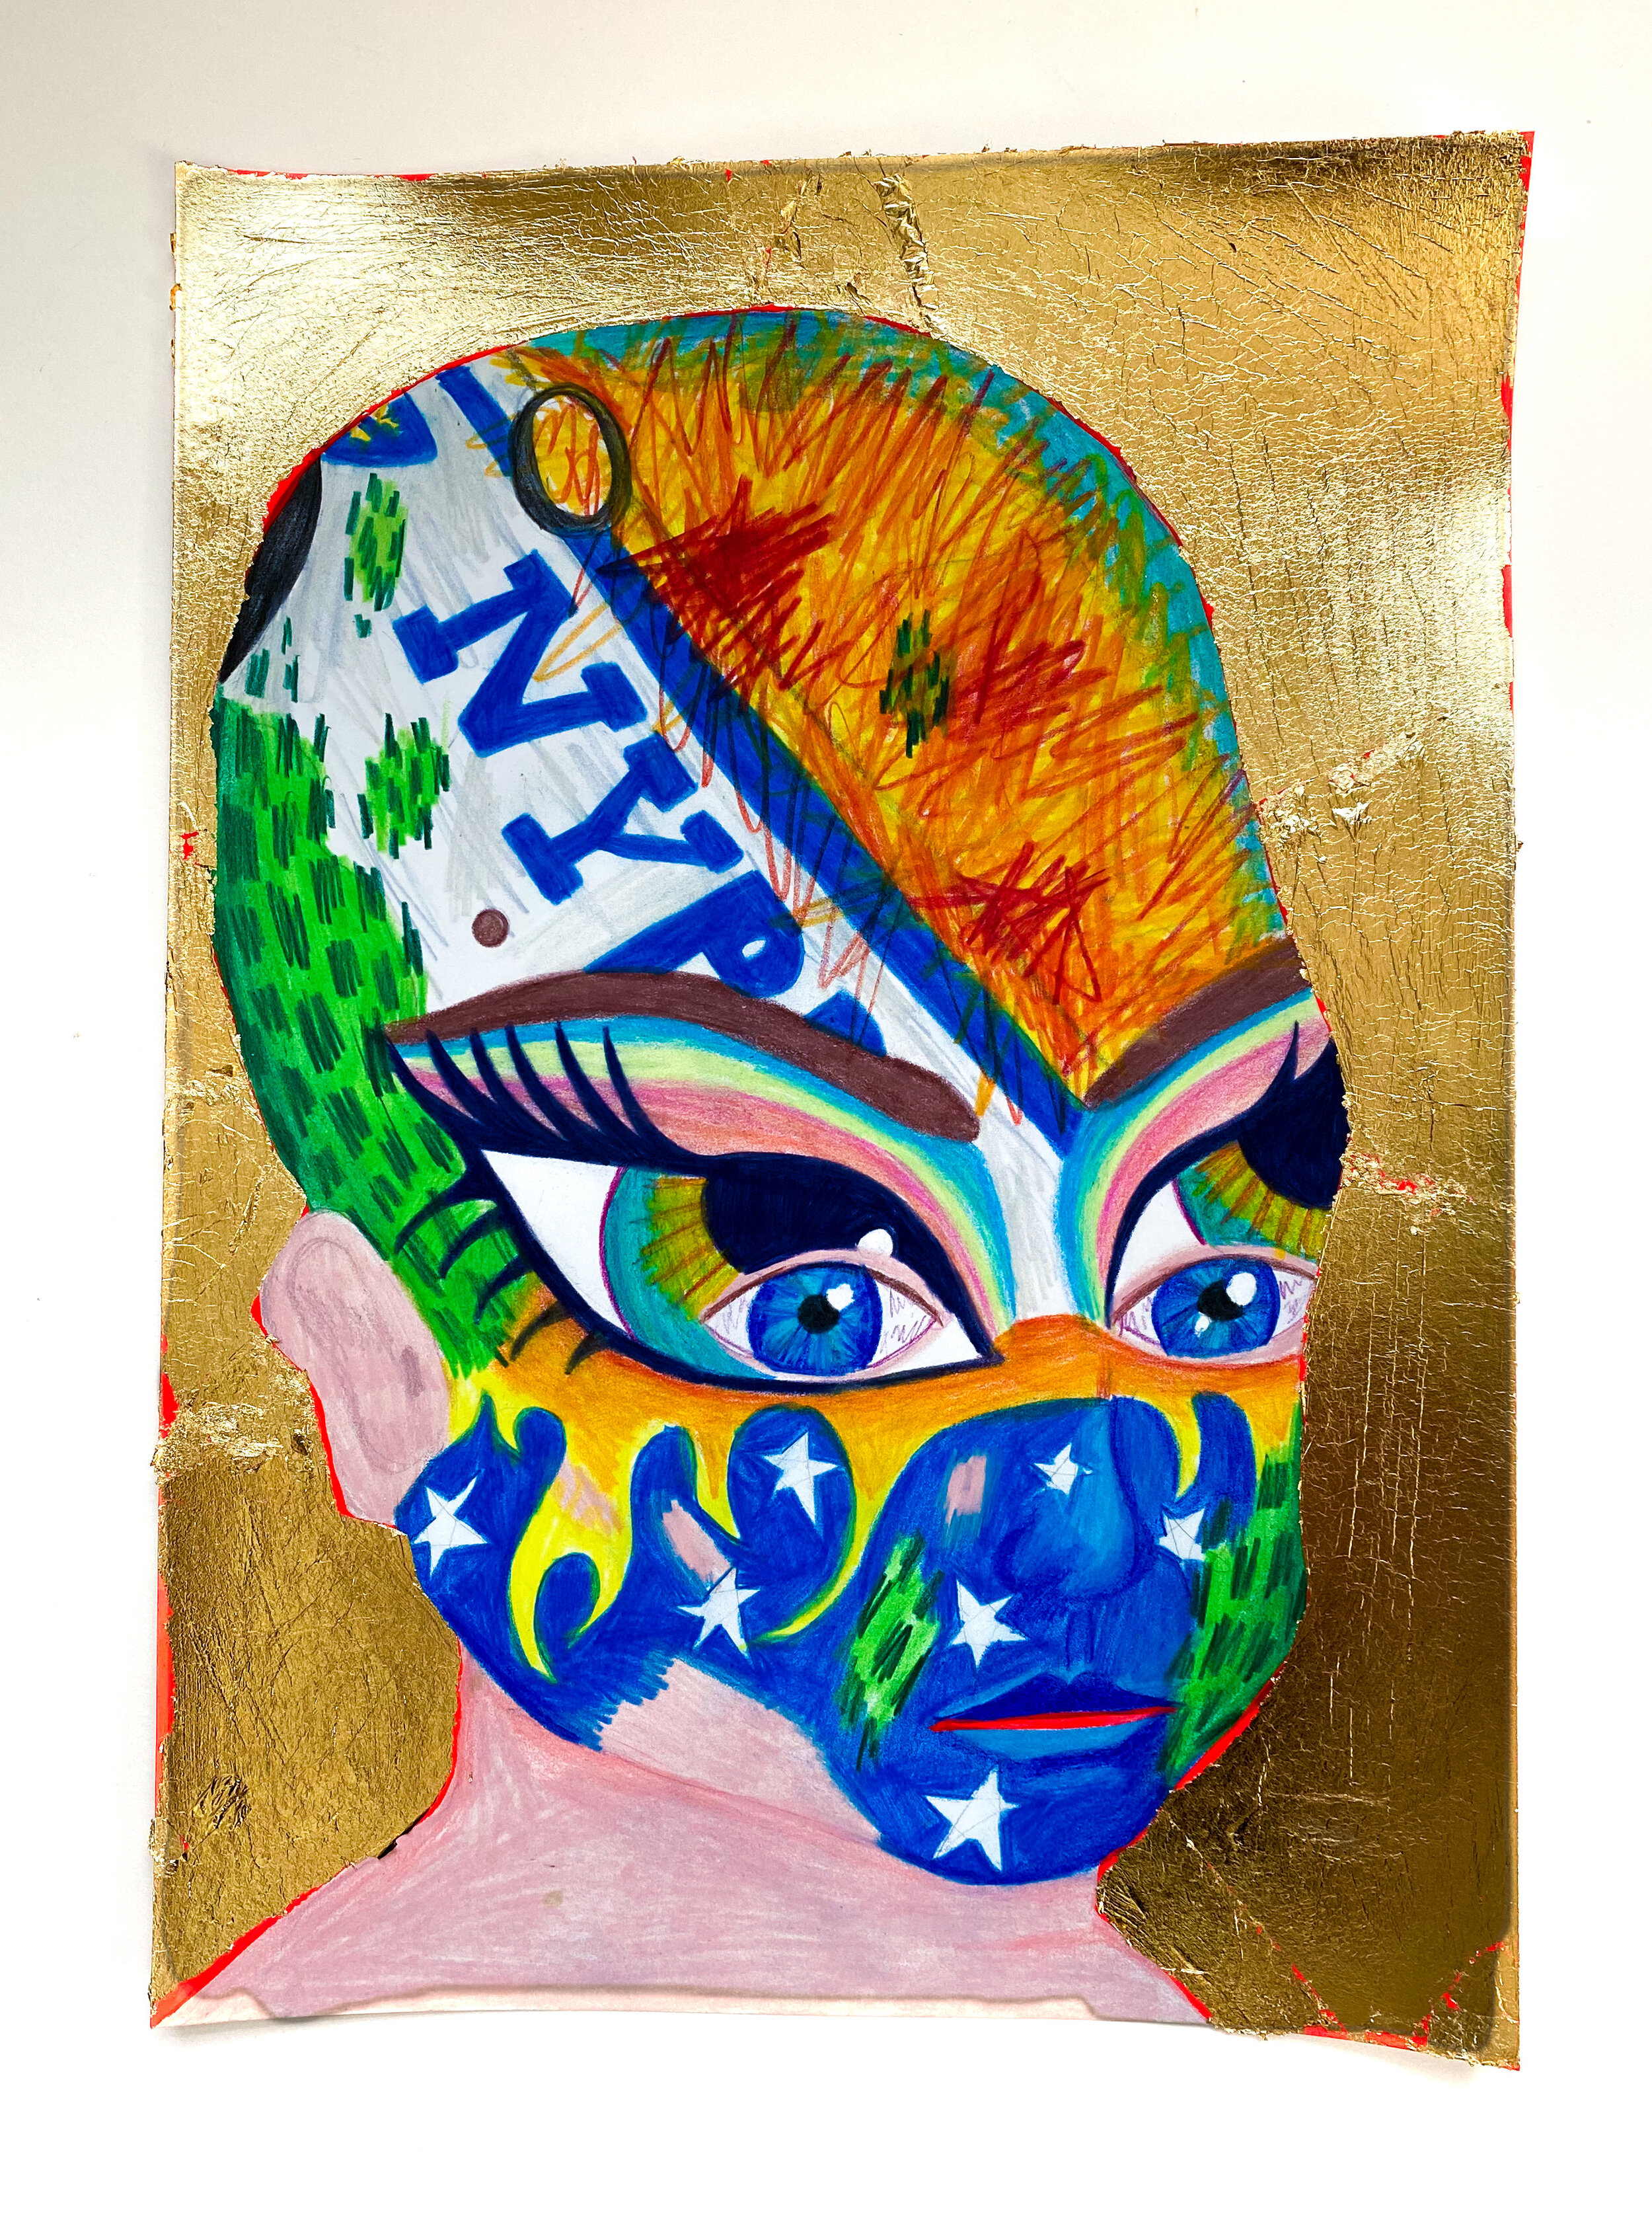   Radical Content,  2020  14 x 10 inches (35.56 x 25.4 cm.)  Colored pencil, gold leaf, and acrylic paint on paper  Private collection, Miami, FL 